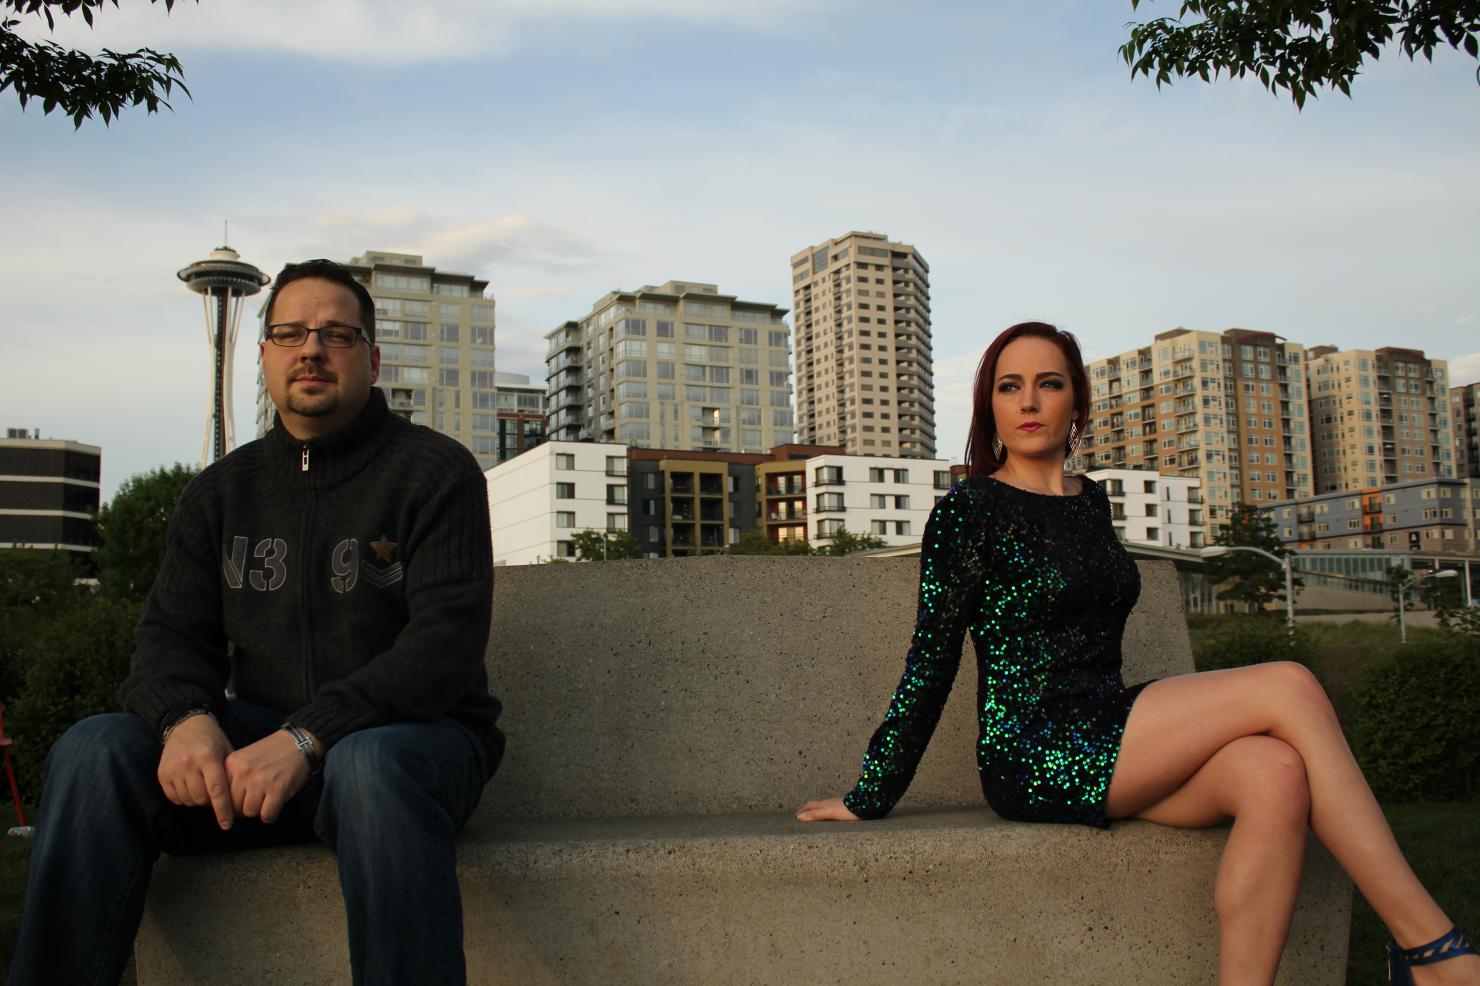 5 Questions with MarQ and Hailey Before Their Live Performance At Contour [Exclusive Interview]5 Questions with MarQ and Hailey Before Their Live Performance At Contour [Exclusive Interview]